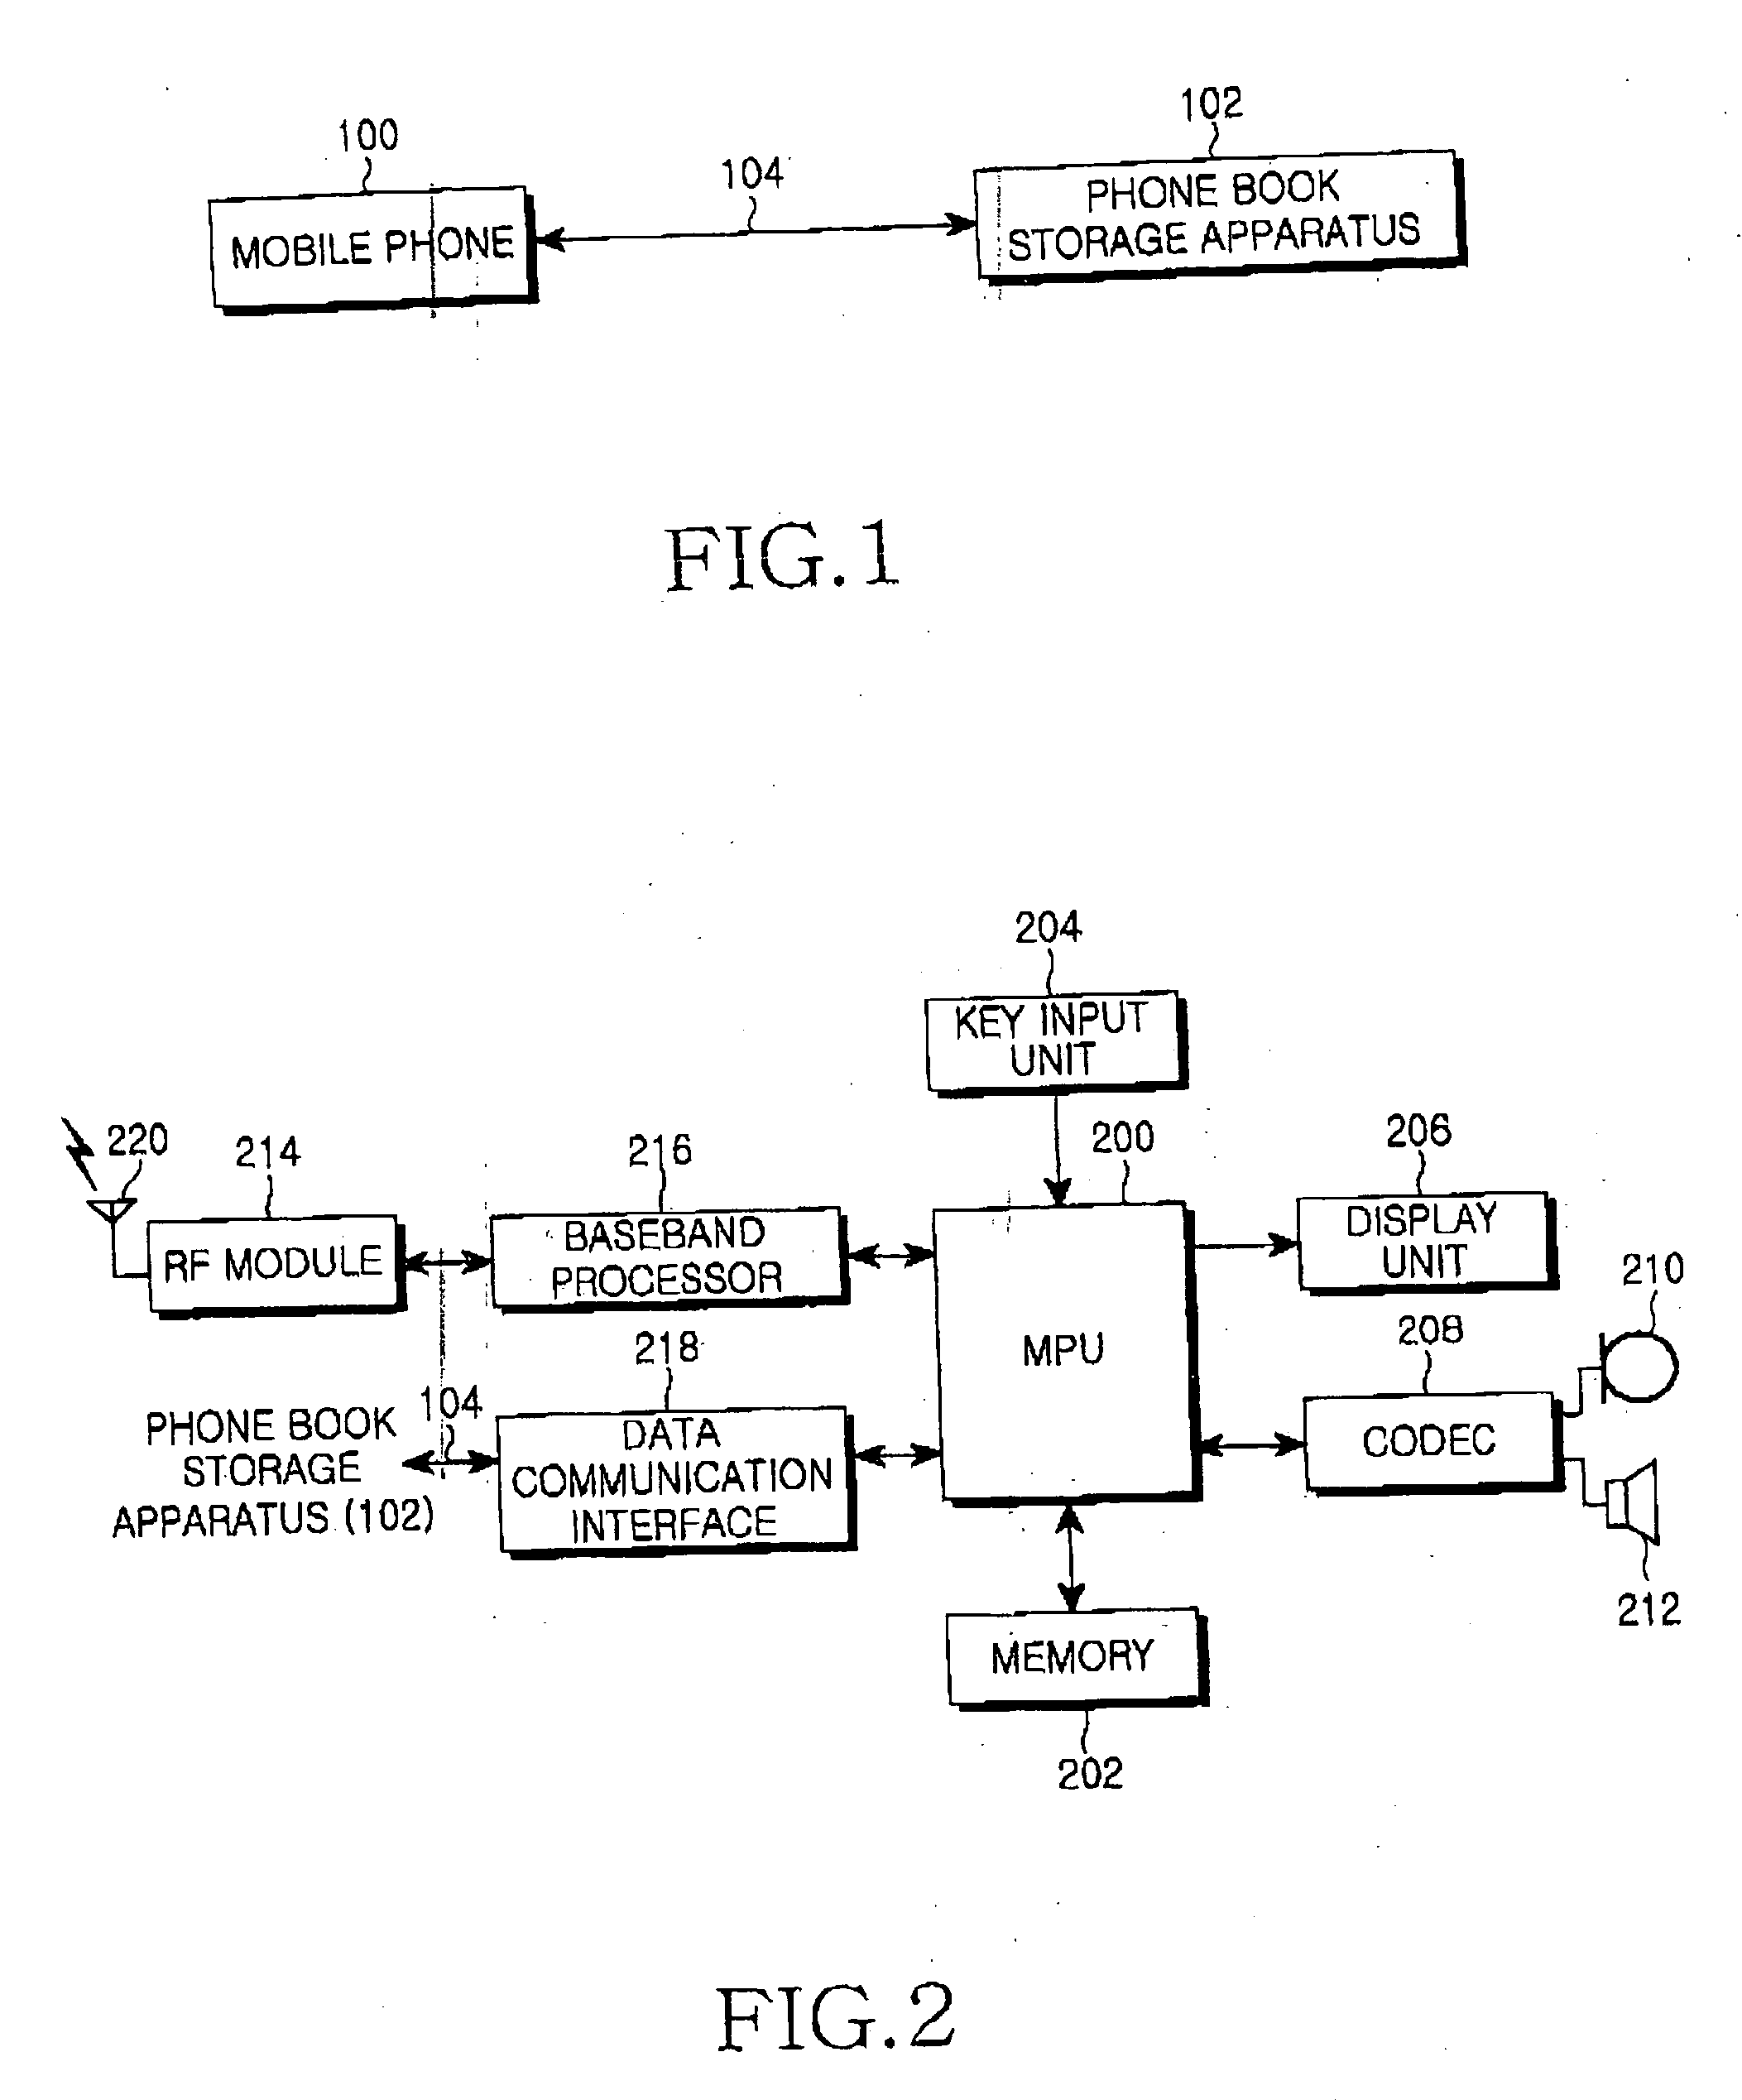 Portable apparatus for storing a phone book, and method and mobile phone for sending a phone call using the same